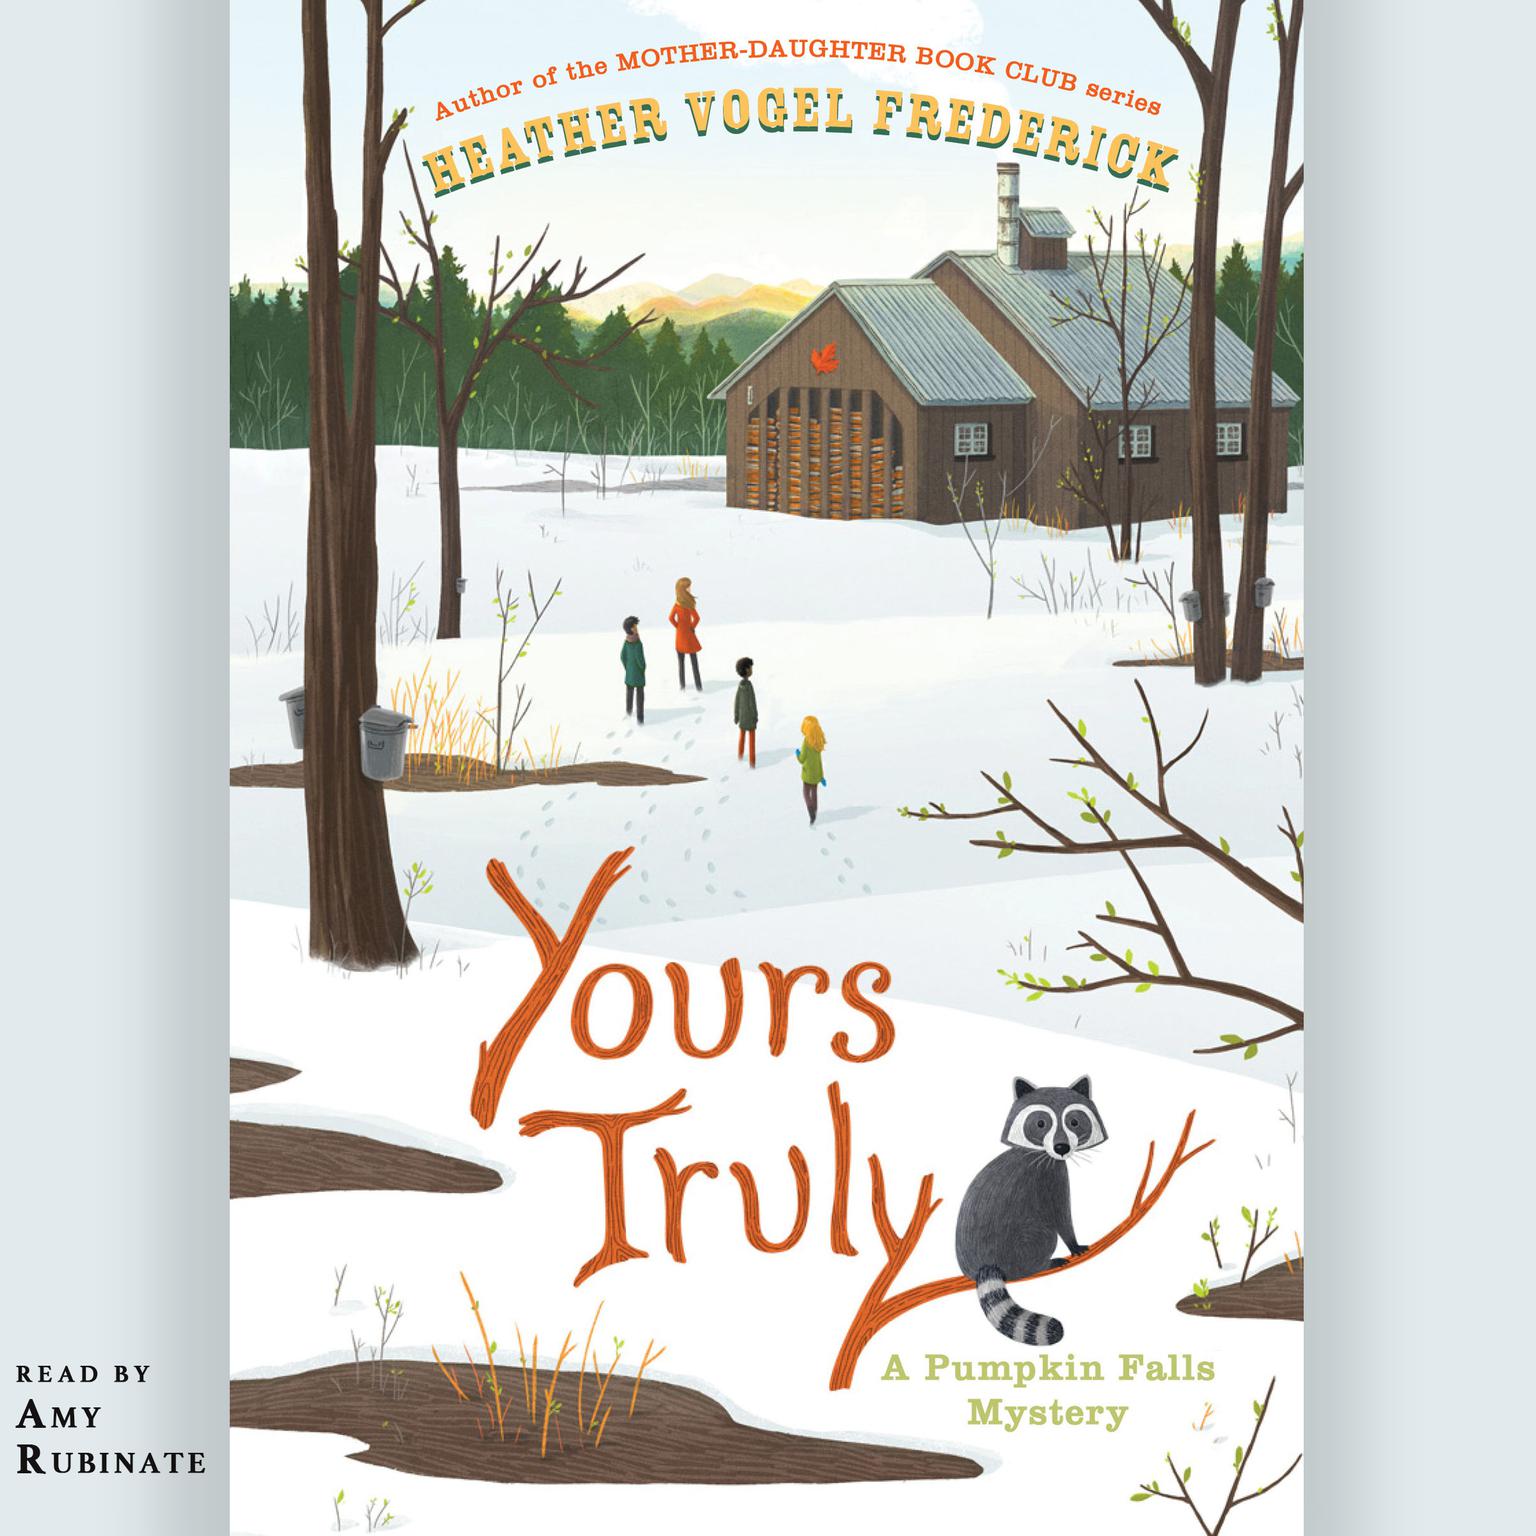 Yours Truly: A Pumpkin Falls Mystery Audiobook, by Heather Vogel Frederick